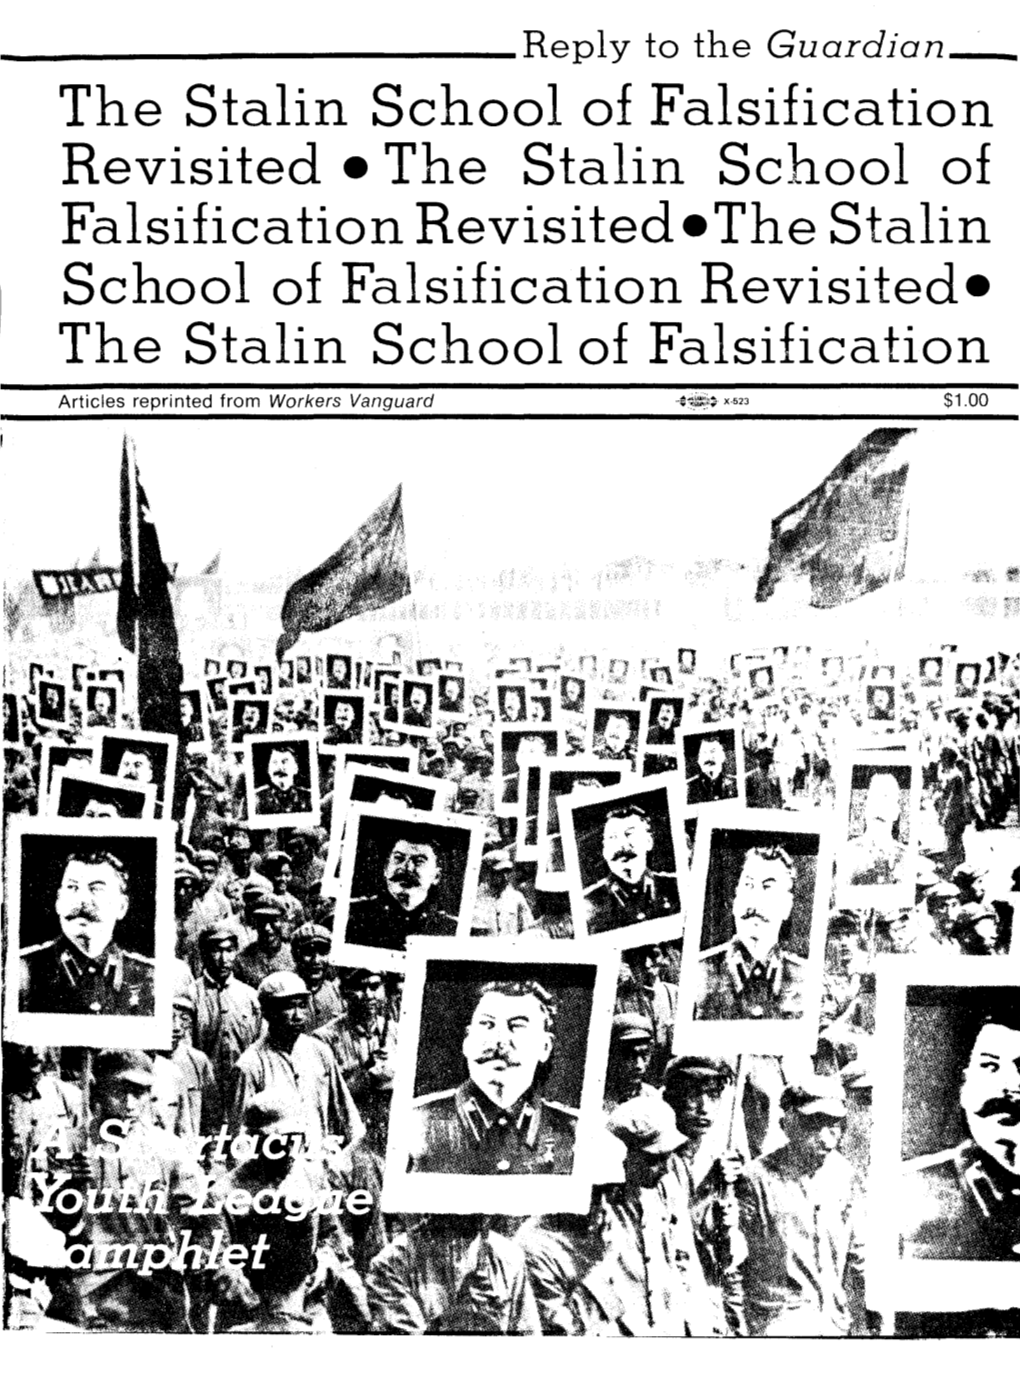 The Stalin School of Falsification Revisited